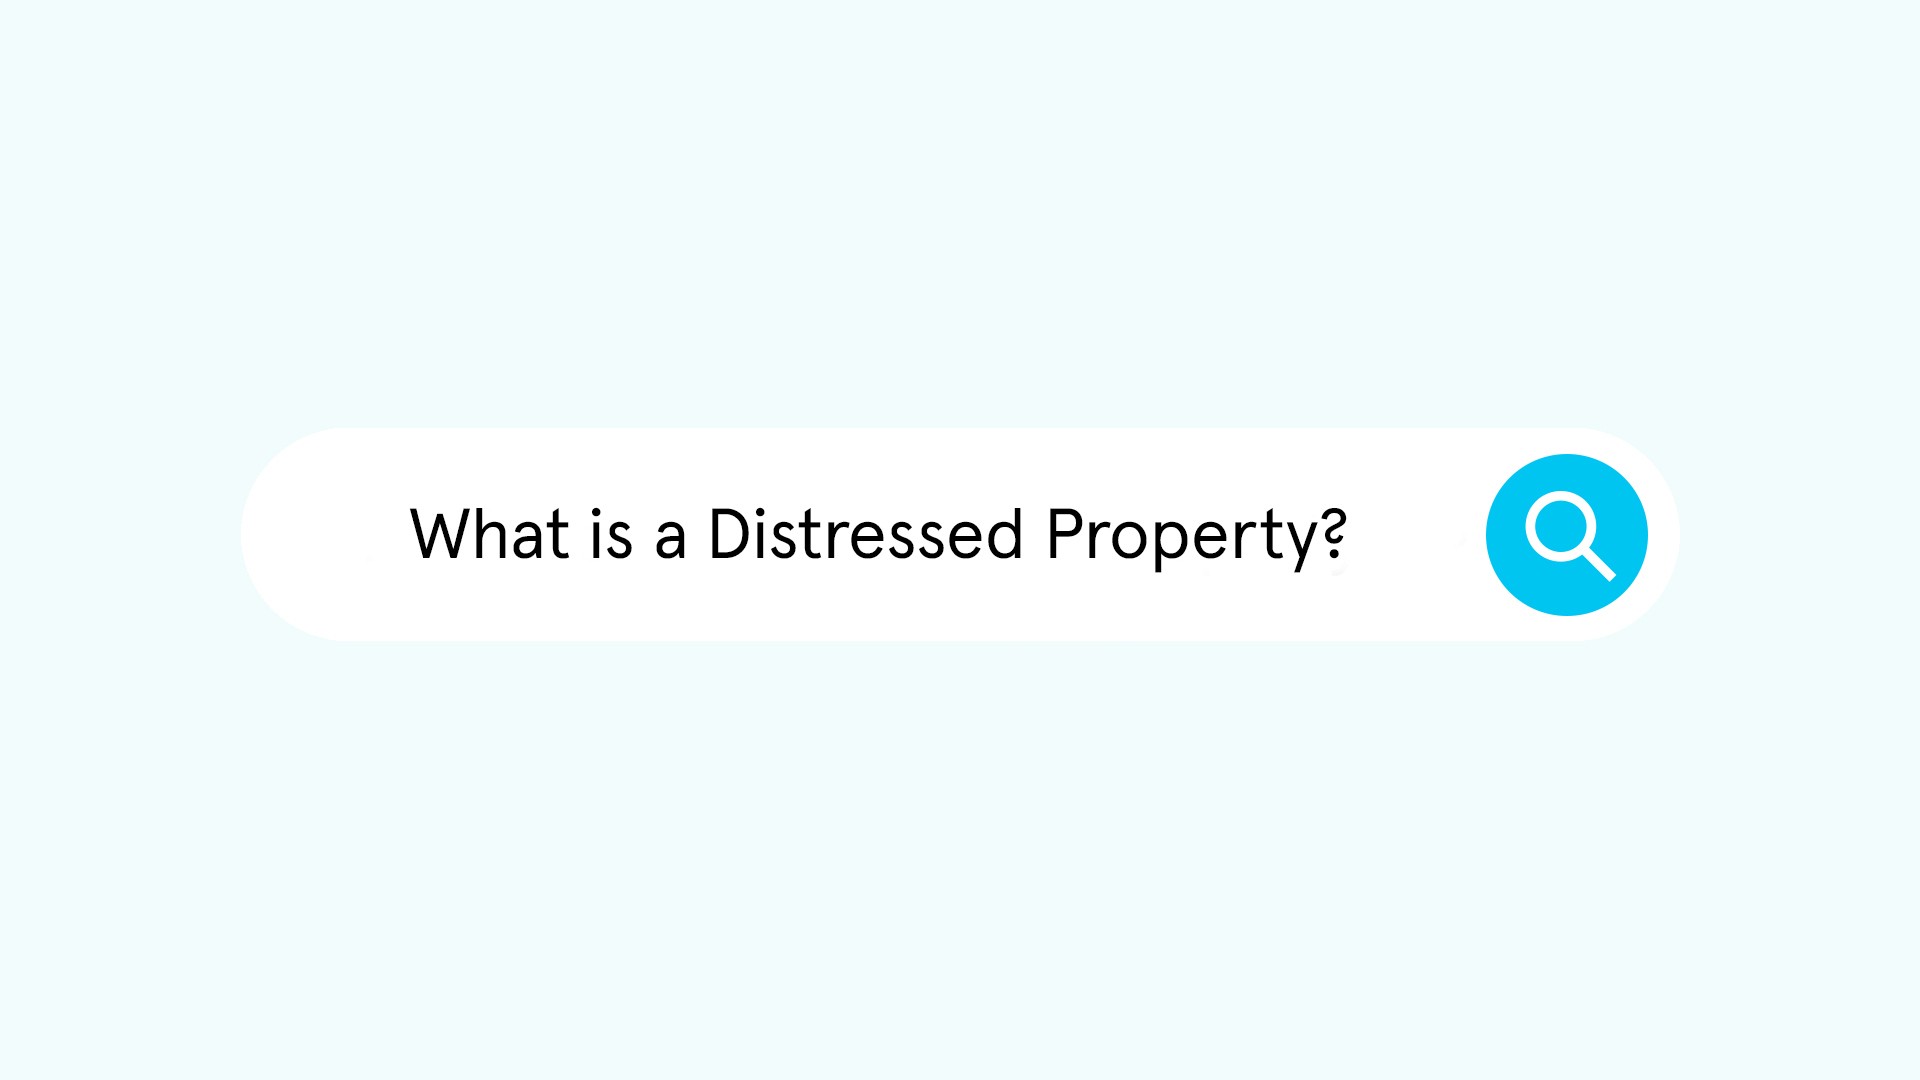 What Is a Distressed Property?